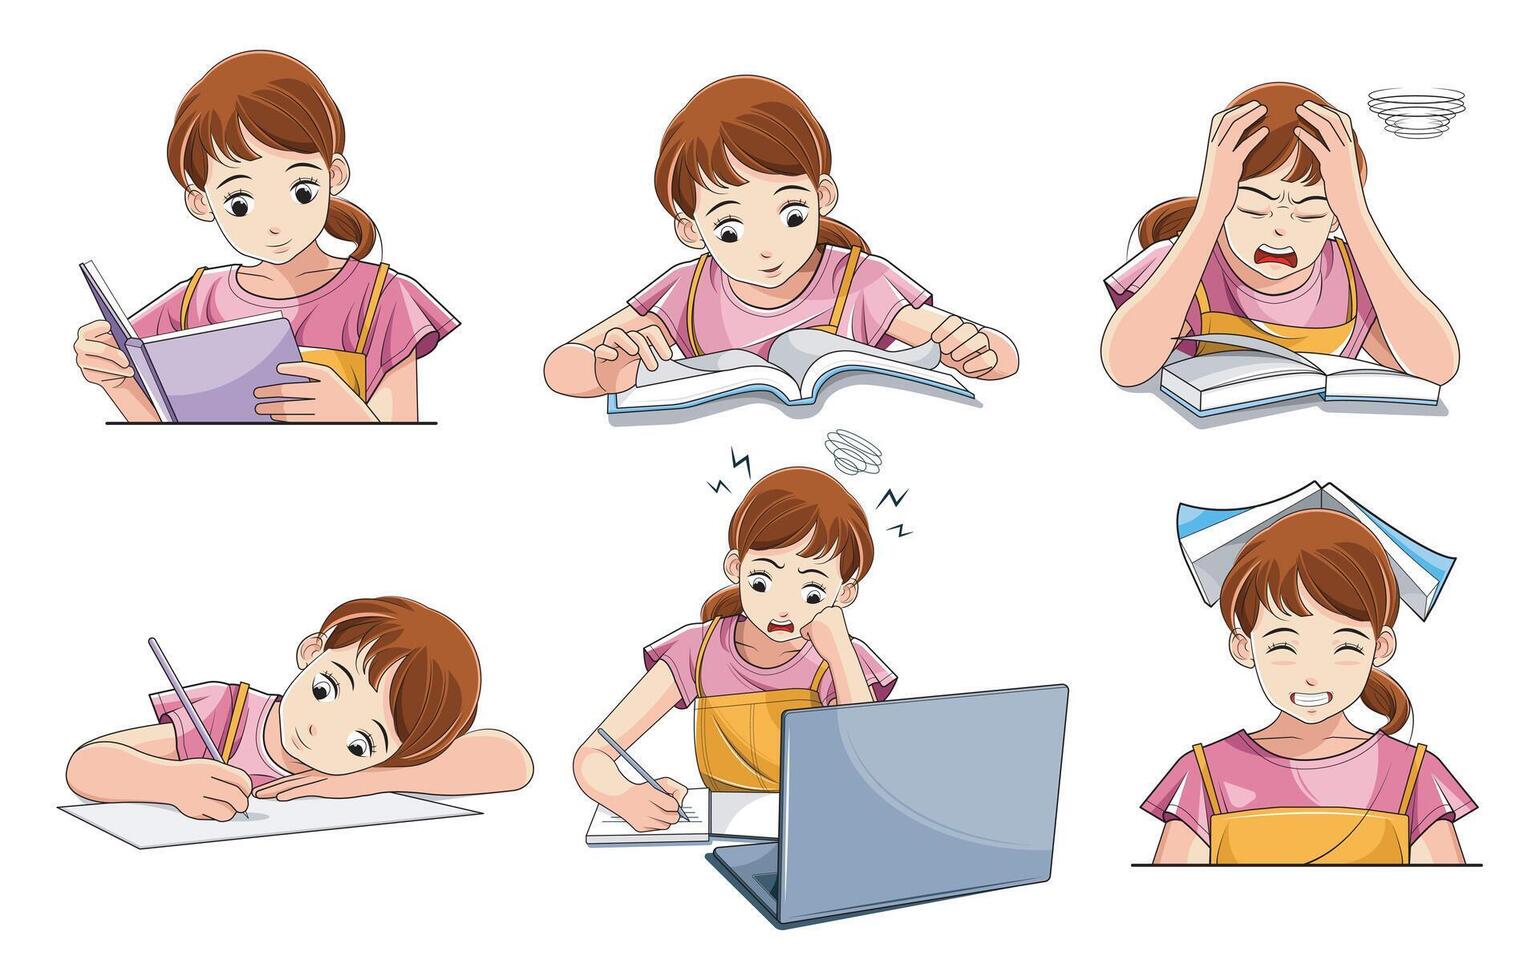 Education concept illustrations. Set of kid girl vector illustrations in various activities of education